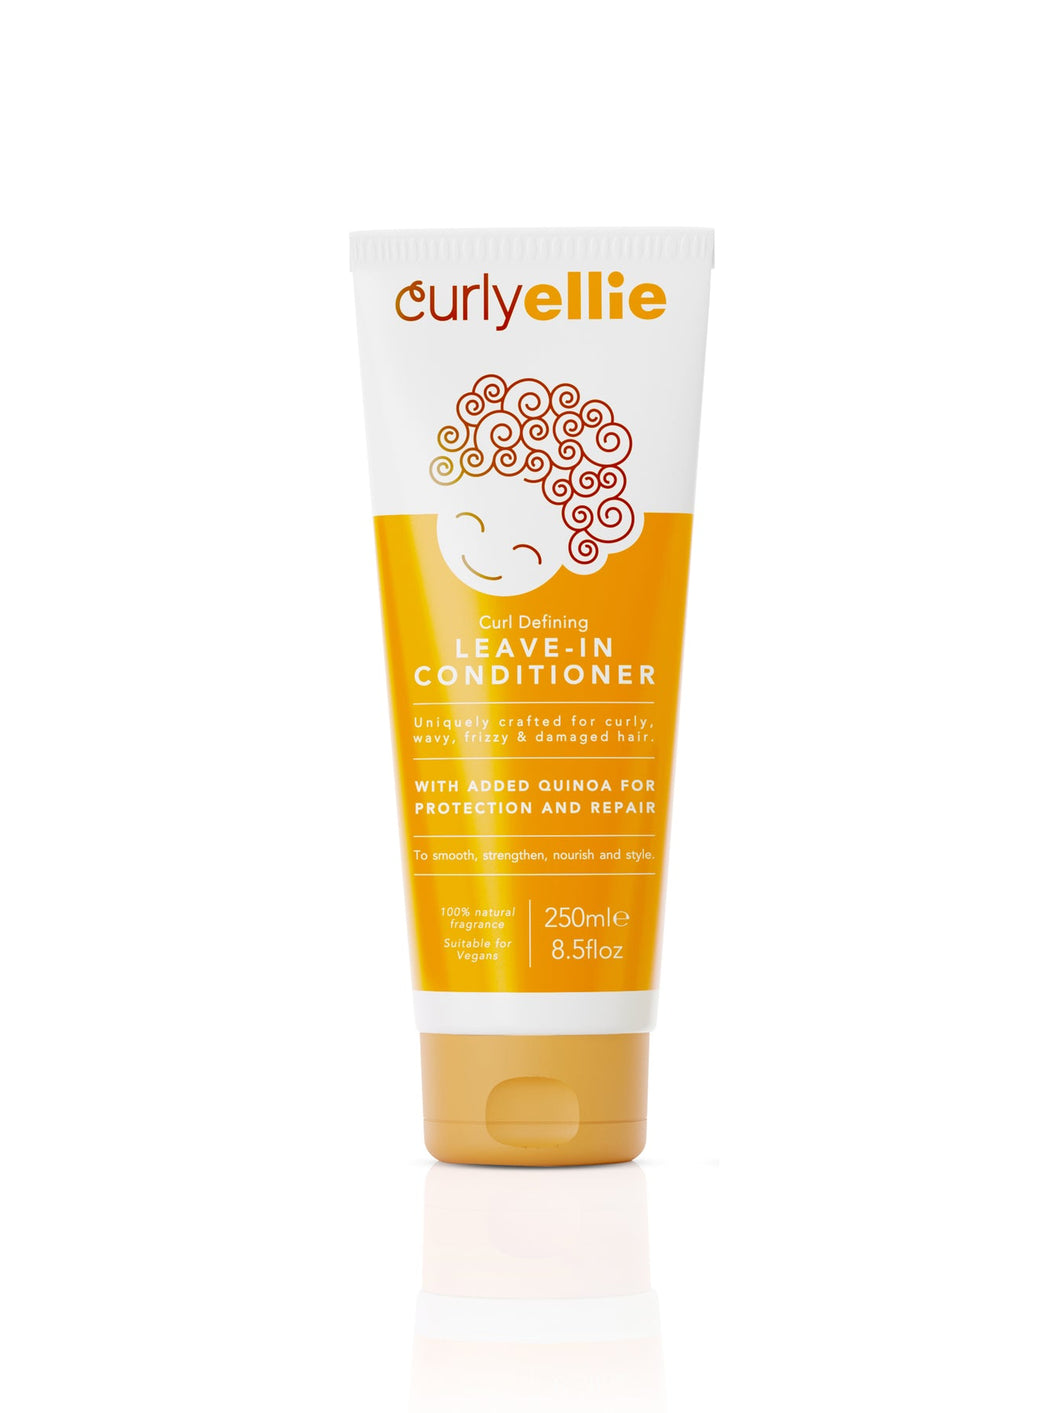 CURLY ELLIE CURL DEFINING LEAVE-IN CONDITIONER 250 ml